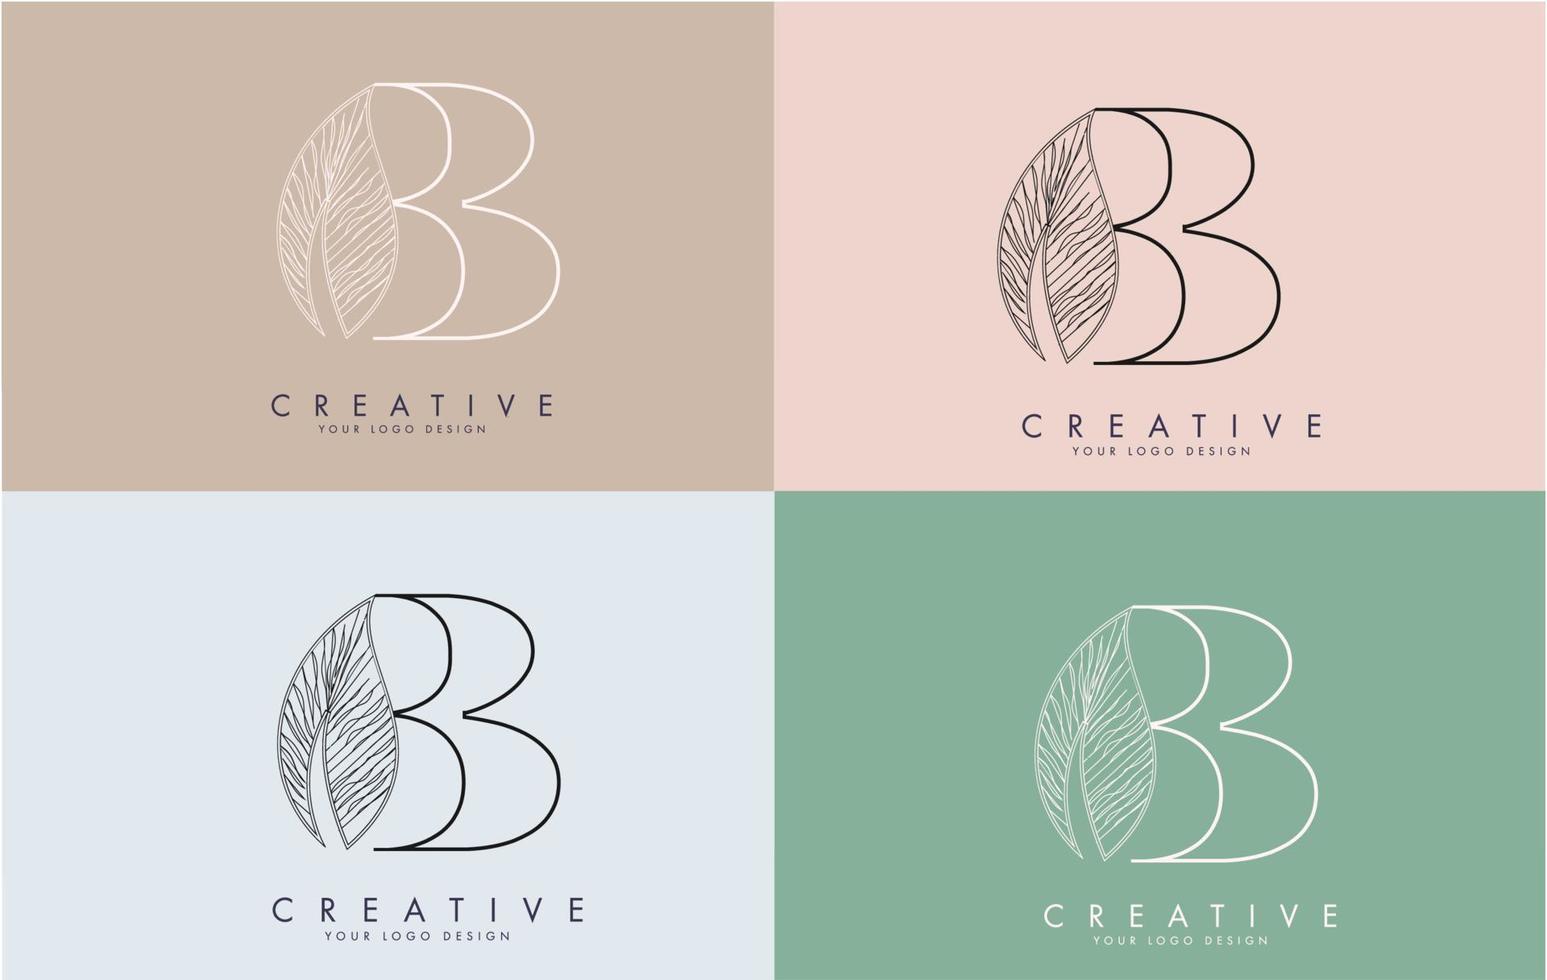 Outline Letter B Logo icon with Wired Leaf Concept Design on colorful backgrounds. vector